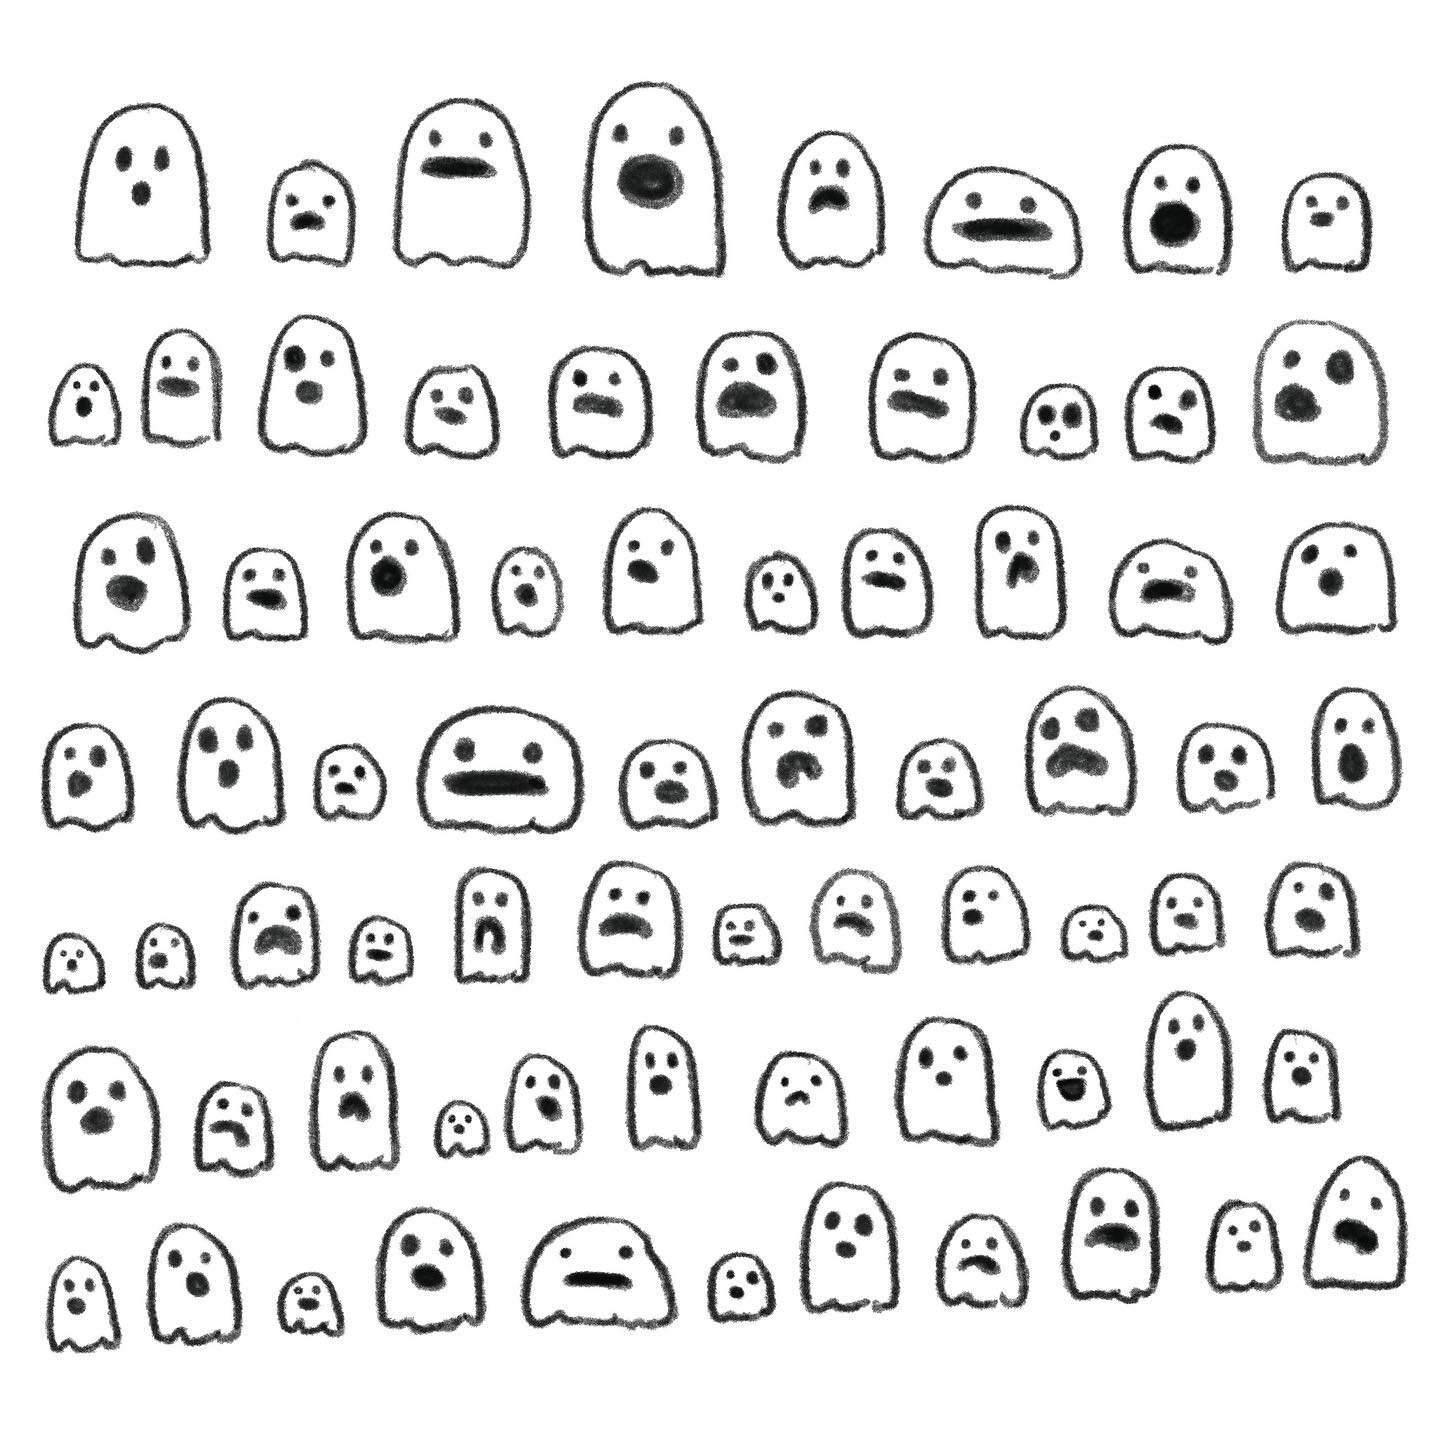 10/26/22: Drawing random cartoon ghost faces as one does. Can you find the &ldquo;strange&rdquo; one for #scbwiartober #artober